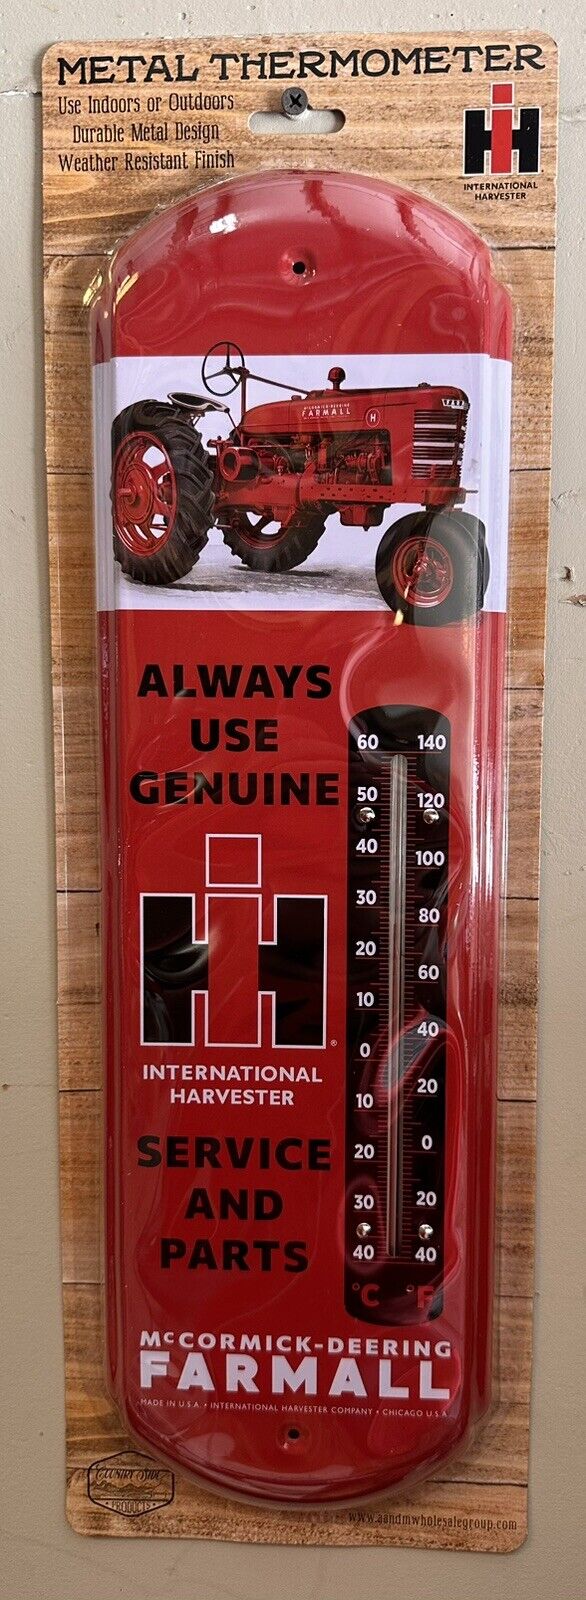 IH International Harvester Farmall Parts and Service Metal Thermometer 5”x17”